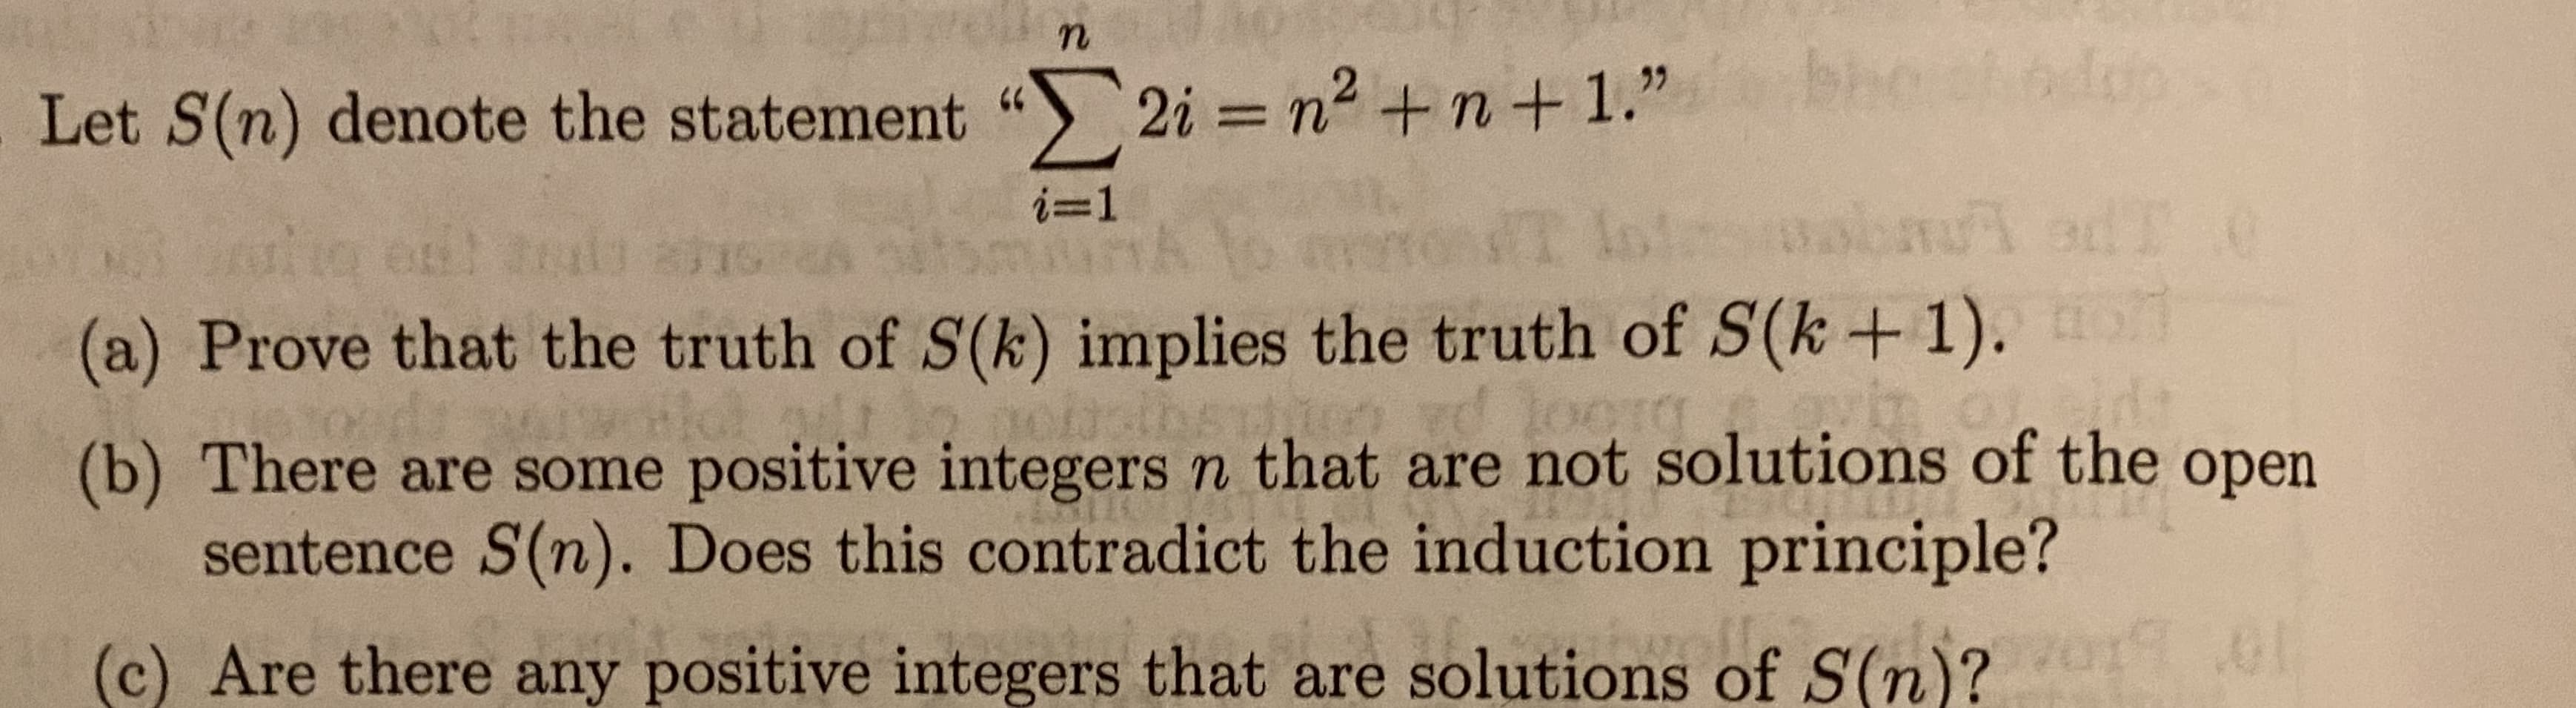 bho edop
Let S(n) denote the statement " 2i = n2 + n+1."
%3D
i=1
(a) Prove that the truth of S(k) implies the truth of S(k +1).
(b) There are some positive integers n that are not solutions of the
sentence S(n). Does this contradict the induction principle?
open
(c) Are there any positive integers that are solutions of S(n)? .0
